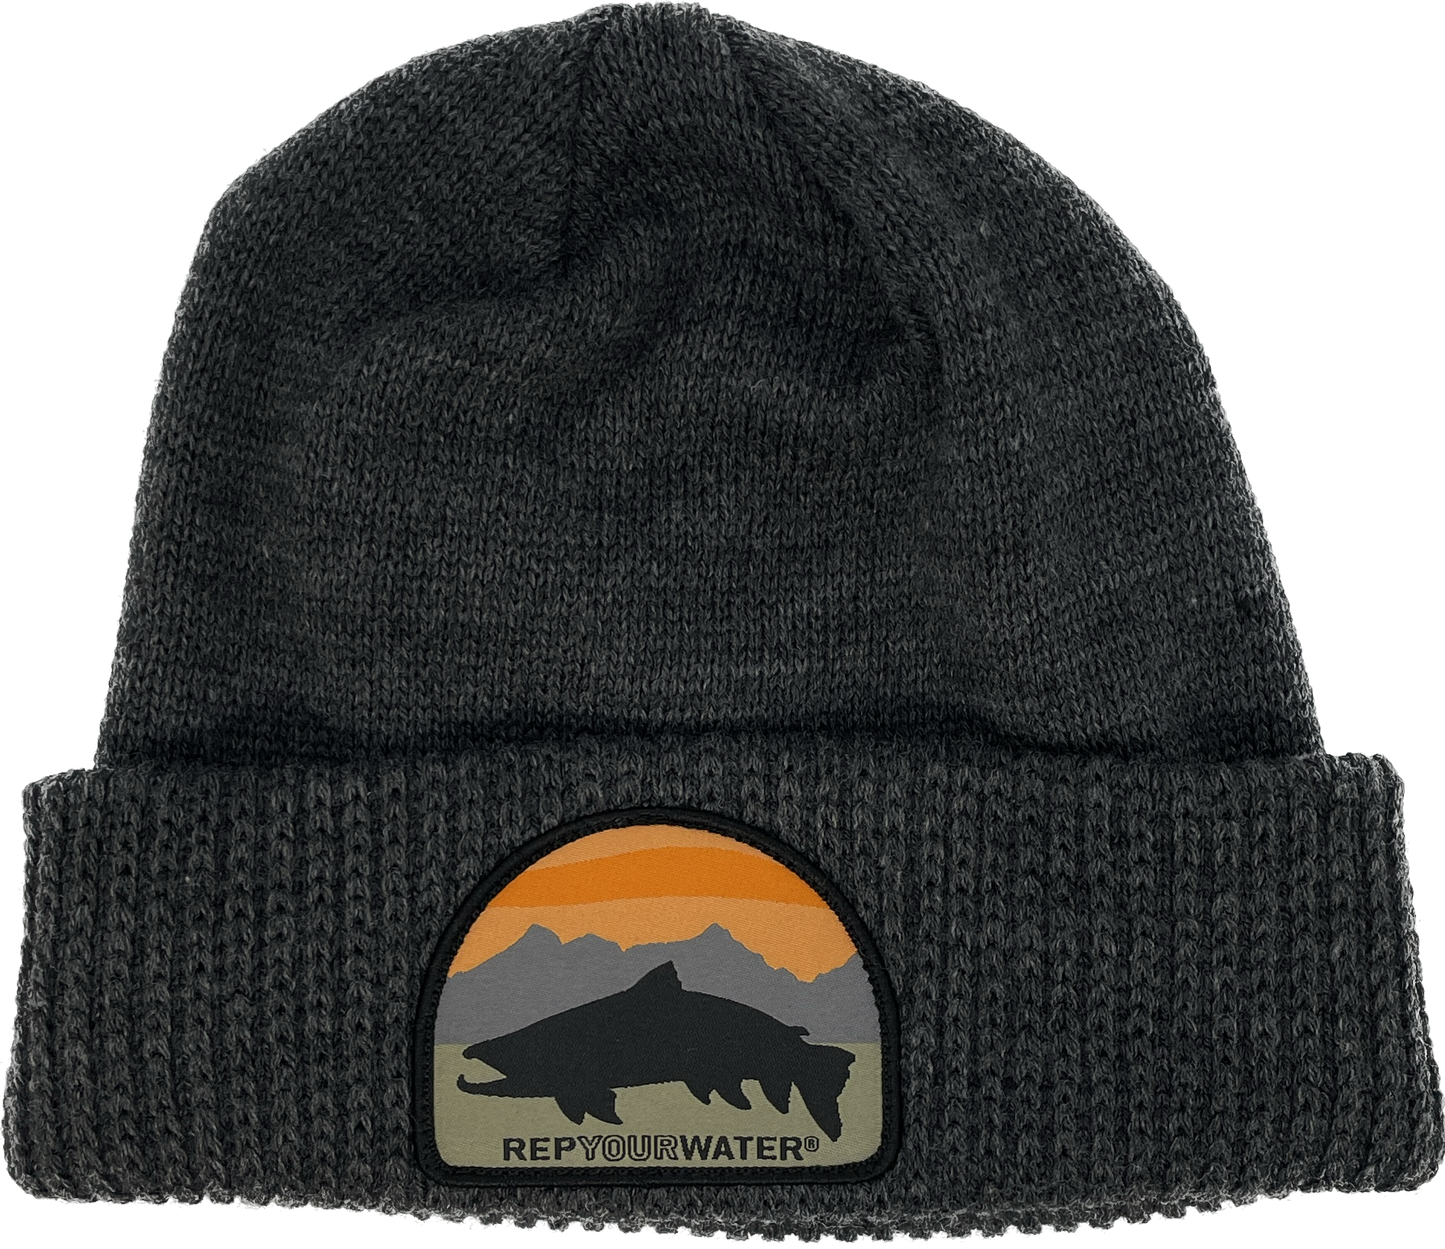 Backcountry Trout Knit Hat